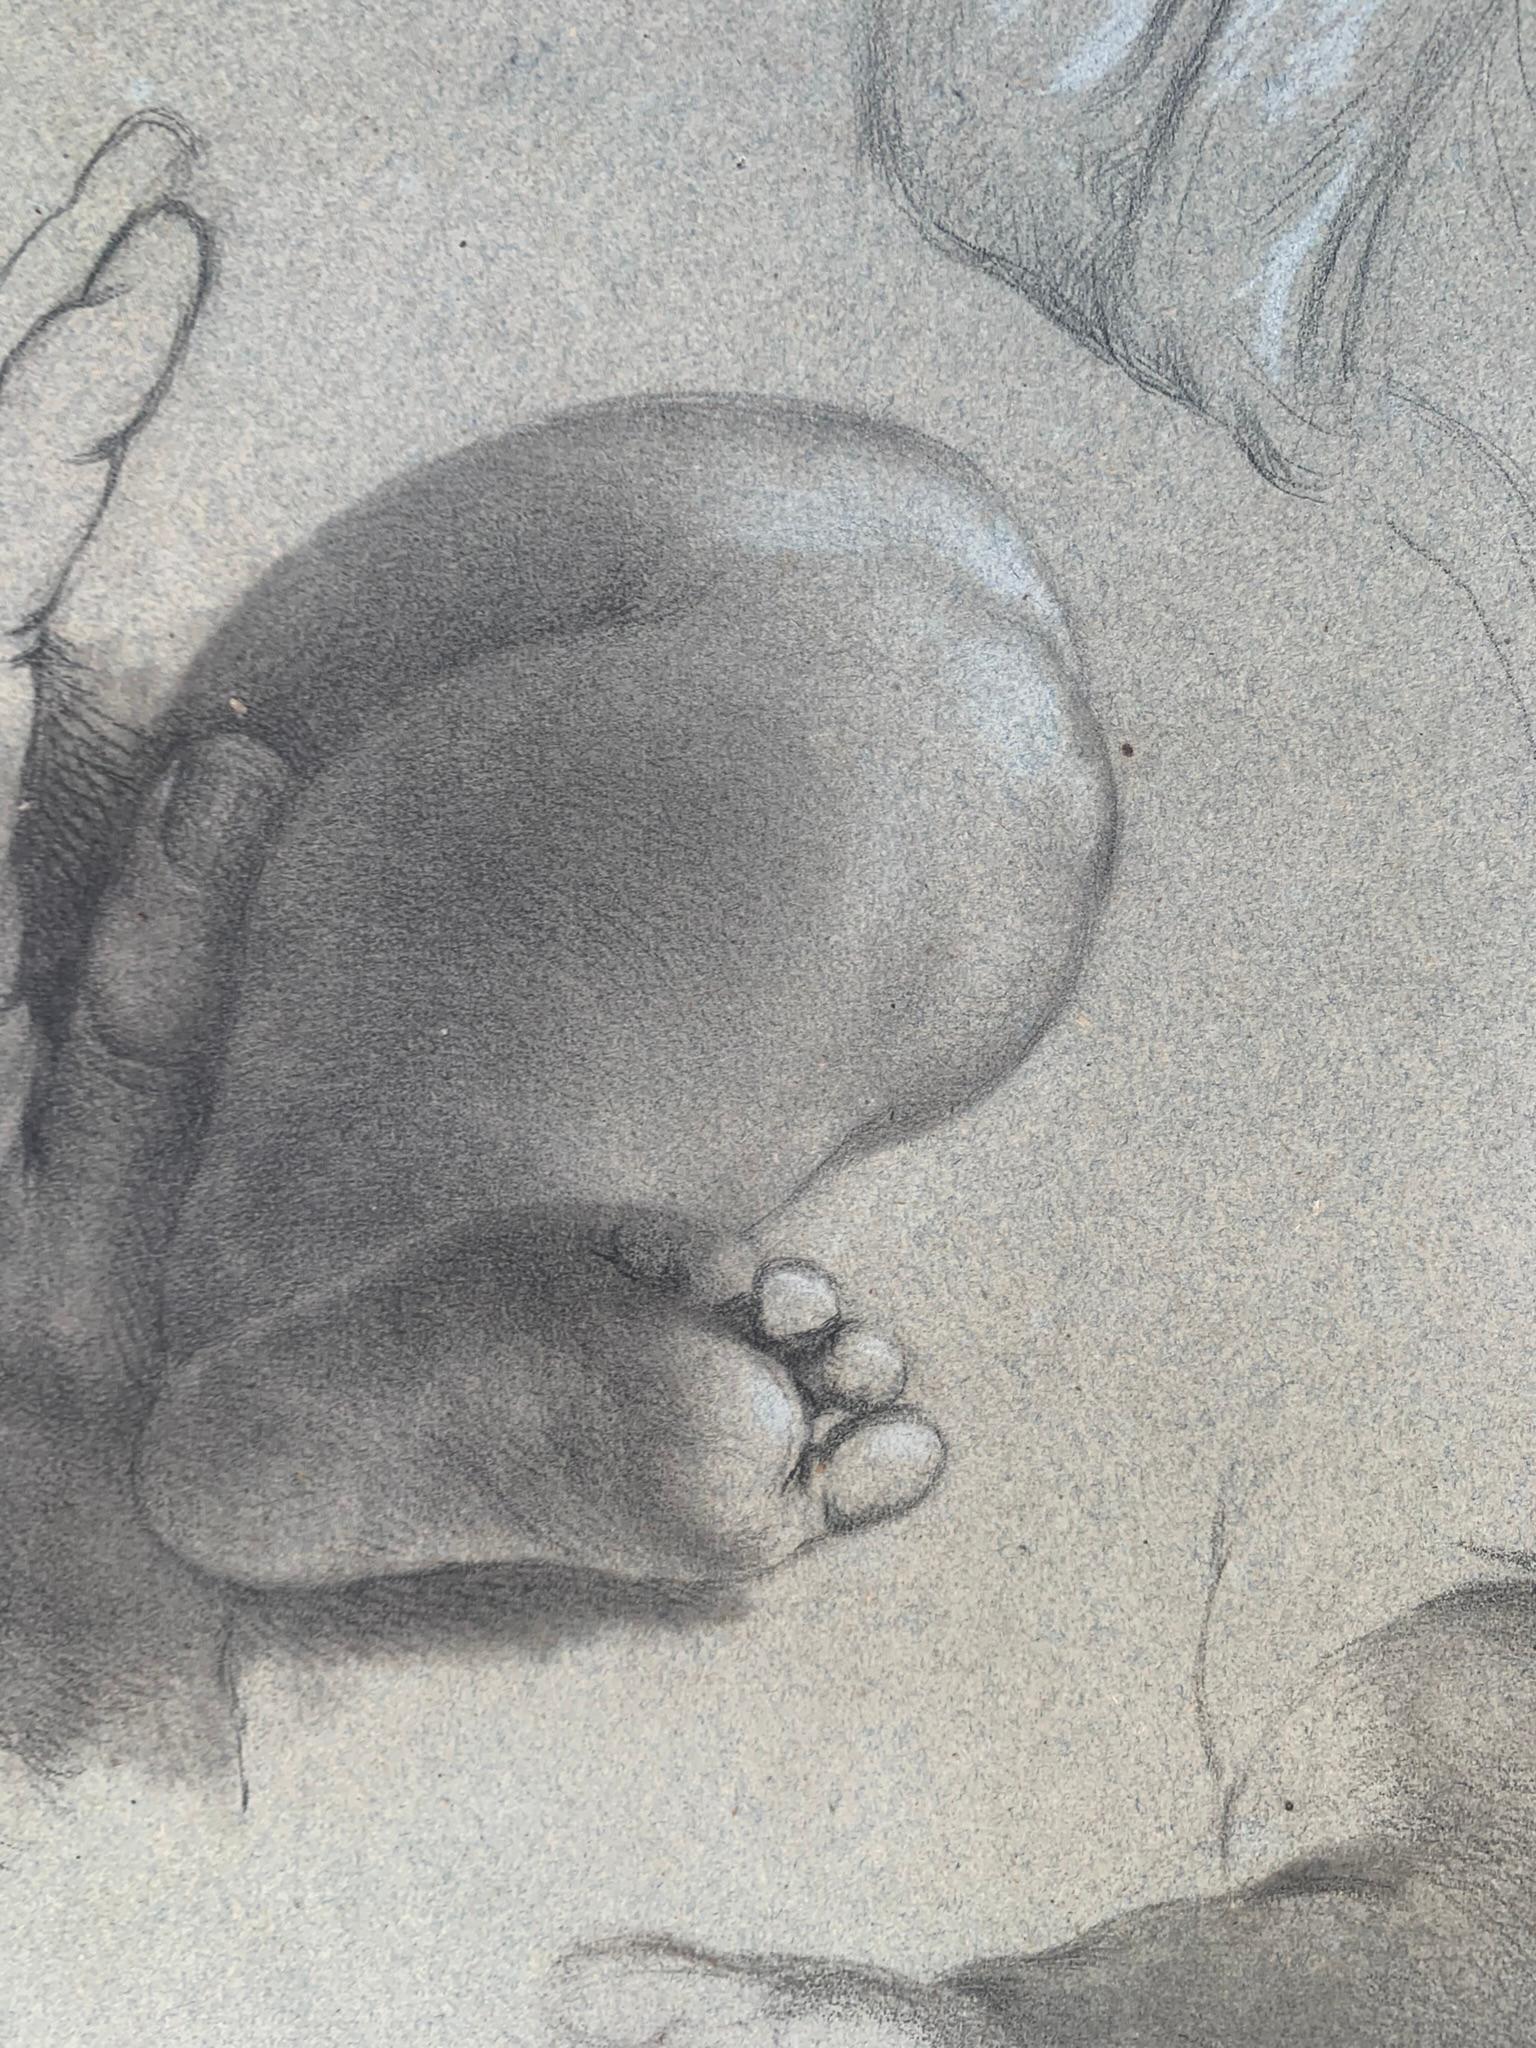 Academic study of hands and child's feet. 19th century.  6